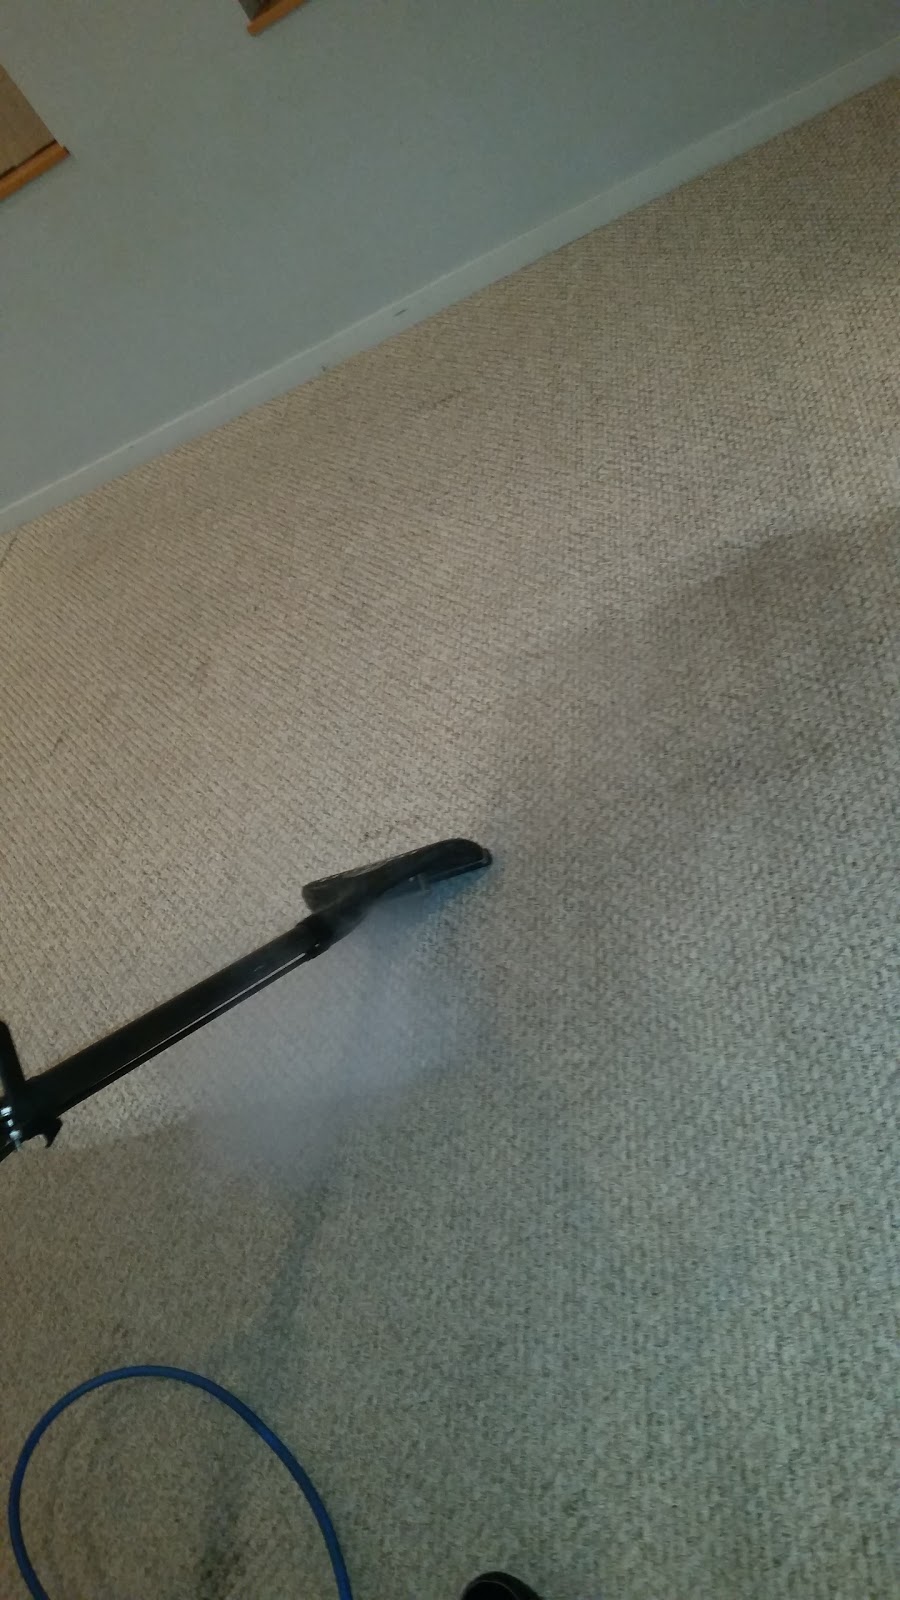 Lower Mainland Carpet Cleaning | 31483 Legacy Ct, Abbotsford, BC V2T 6W5, Canada | Phone: (604) 857-2727